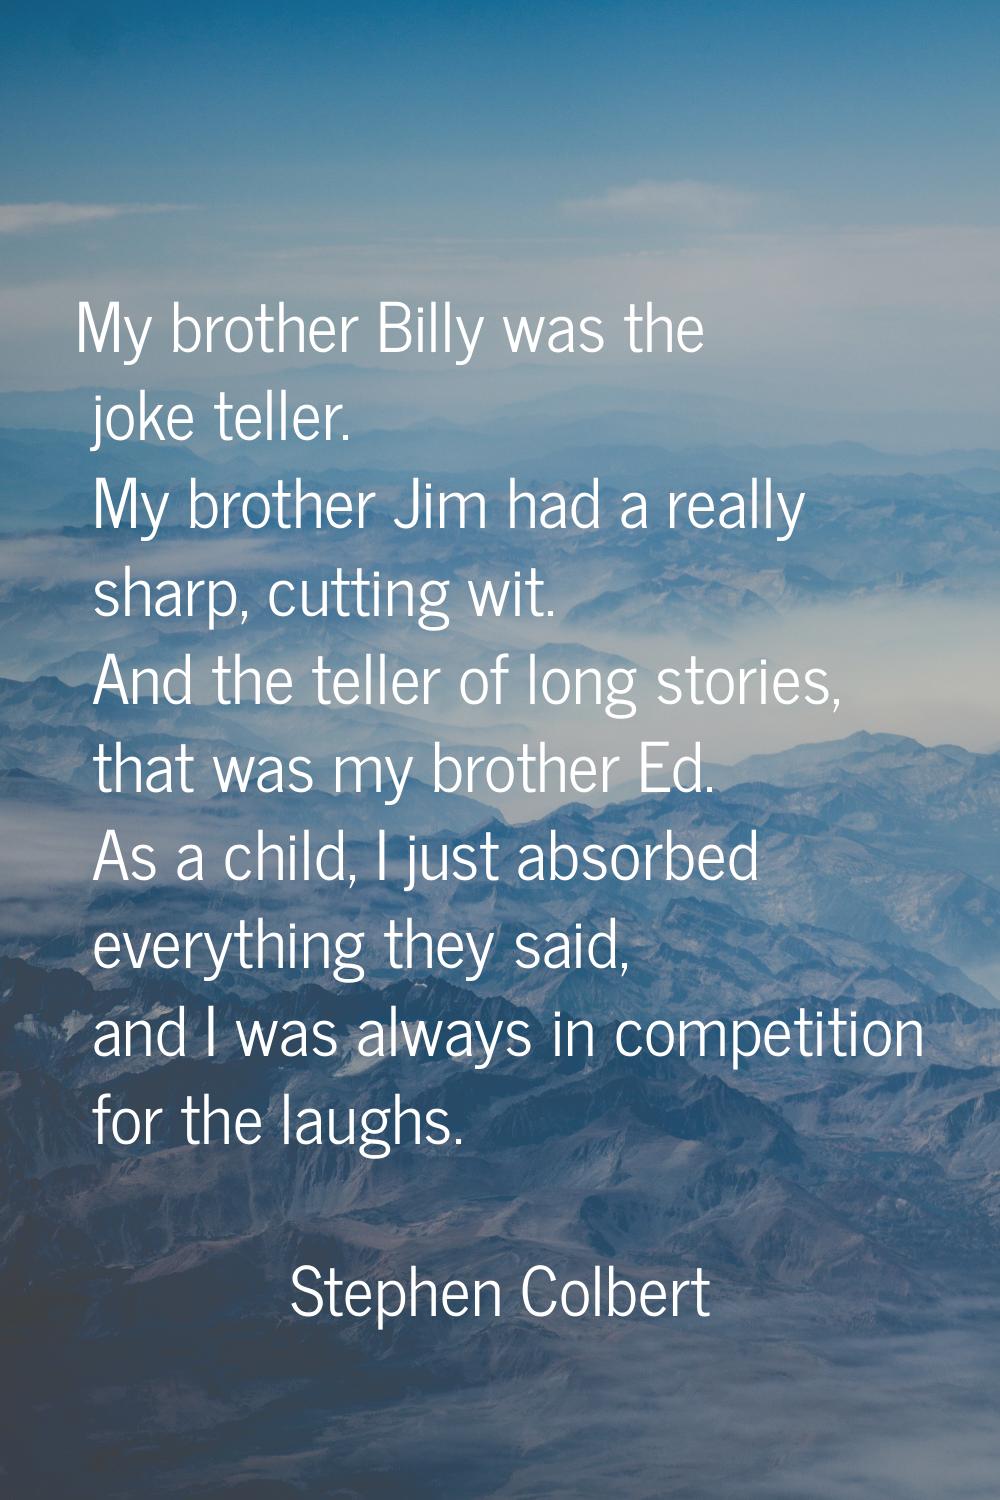 My brother Billy was the joke teller. My brother Jim had a really sharp, cutting wit. And the telle